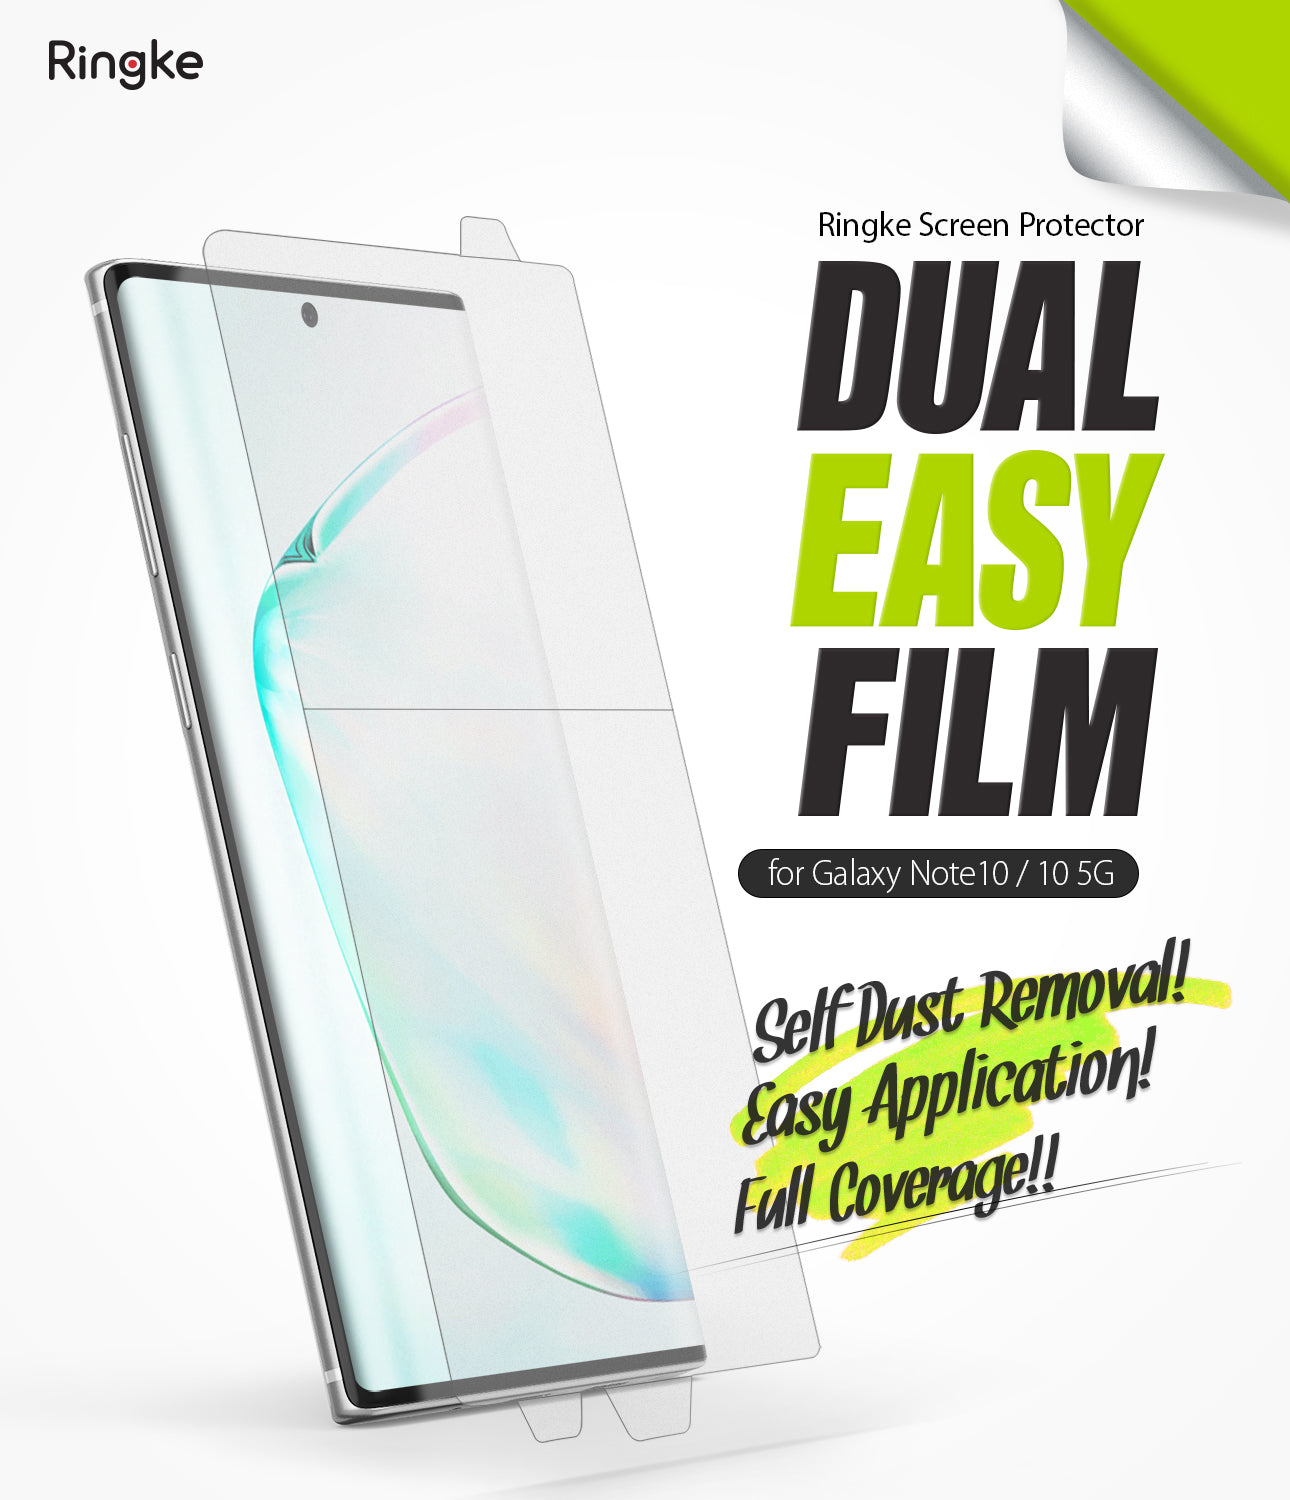 Galaxy Note 10 [Dual Easy Full Cover] Screen Protector [2 Pack]